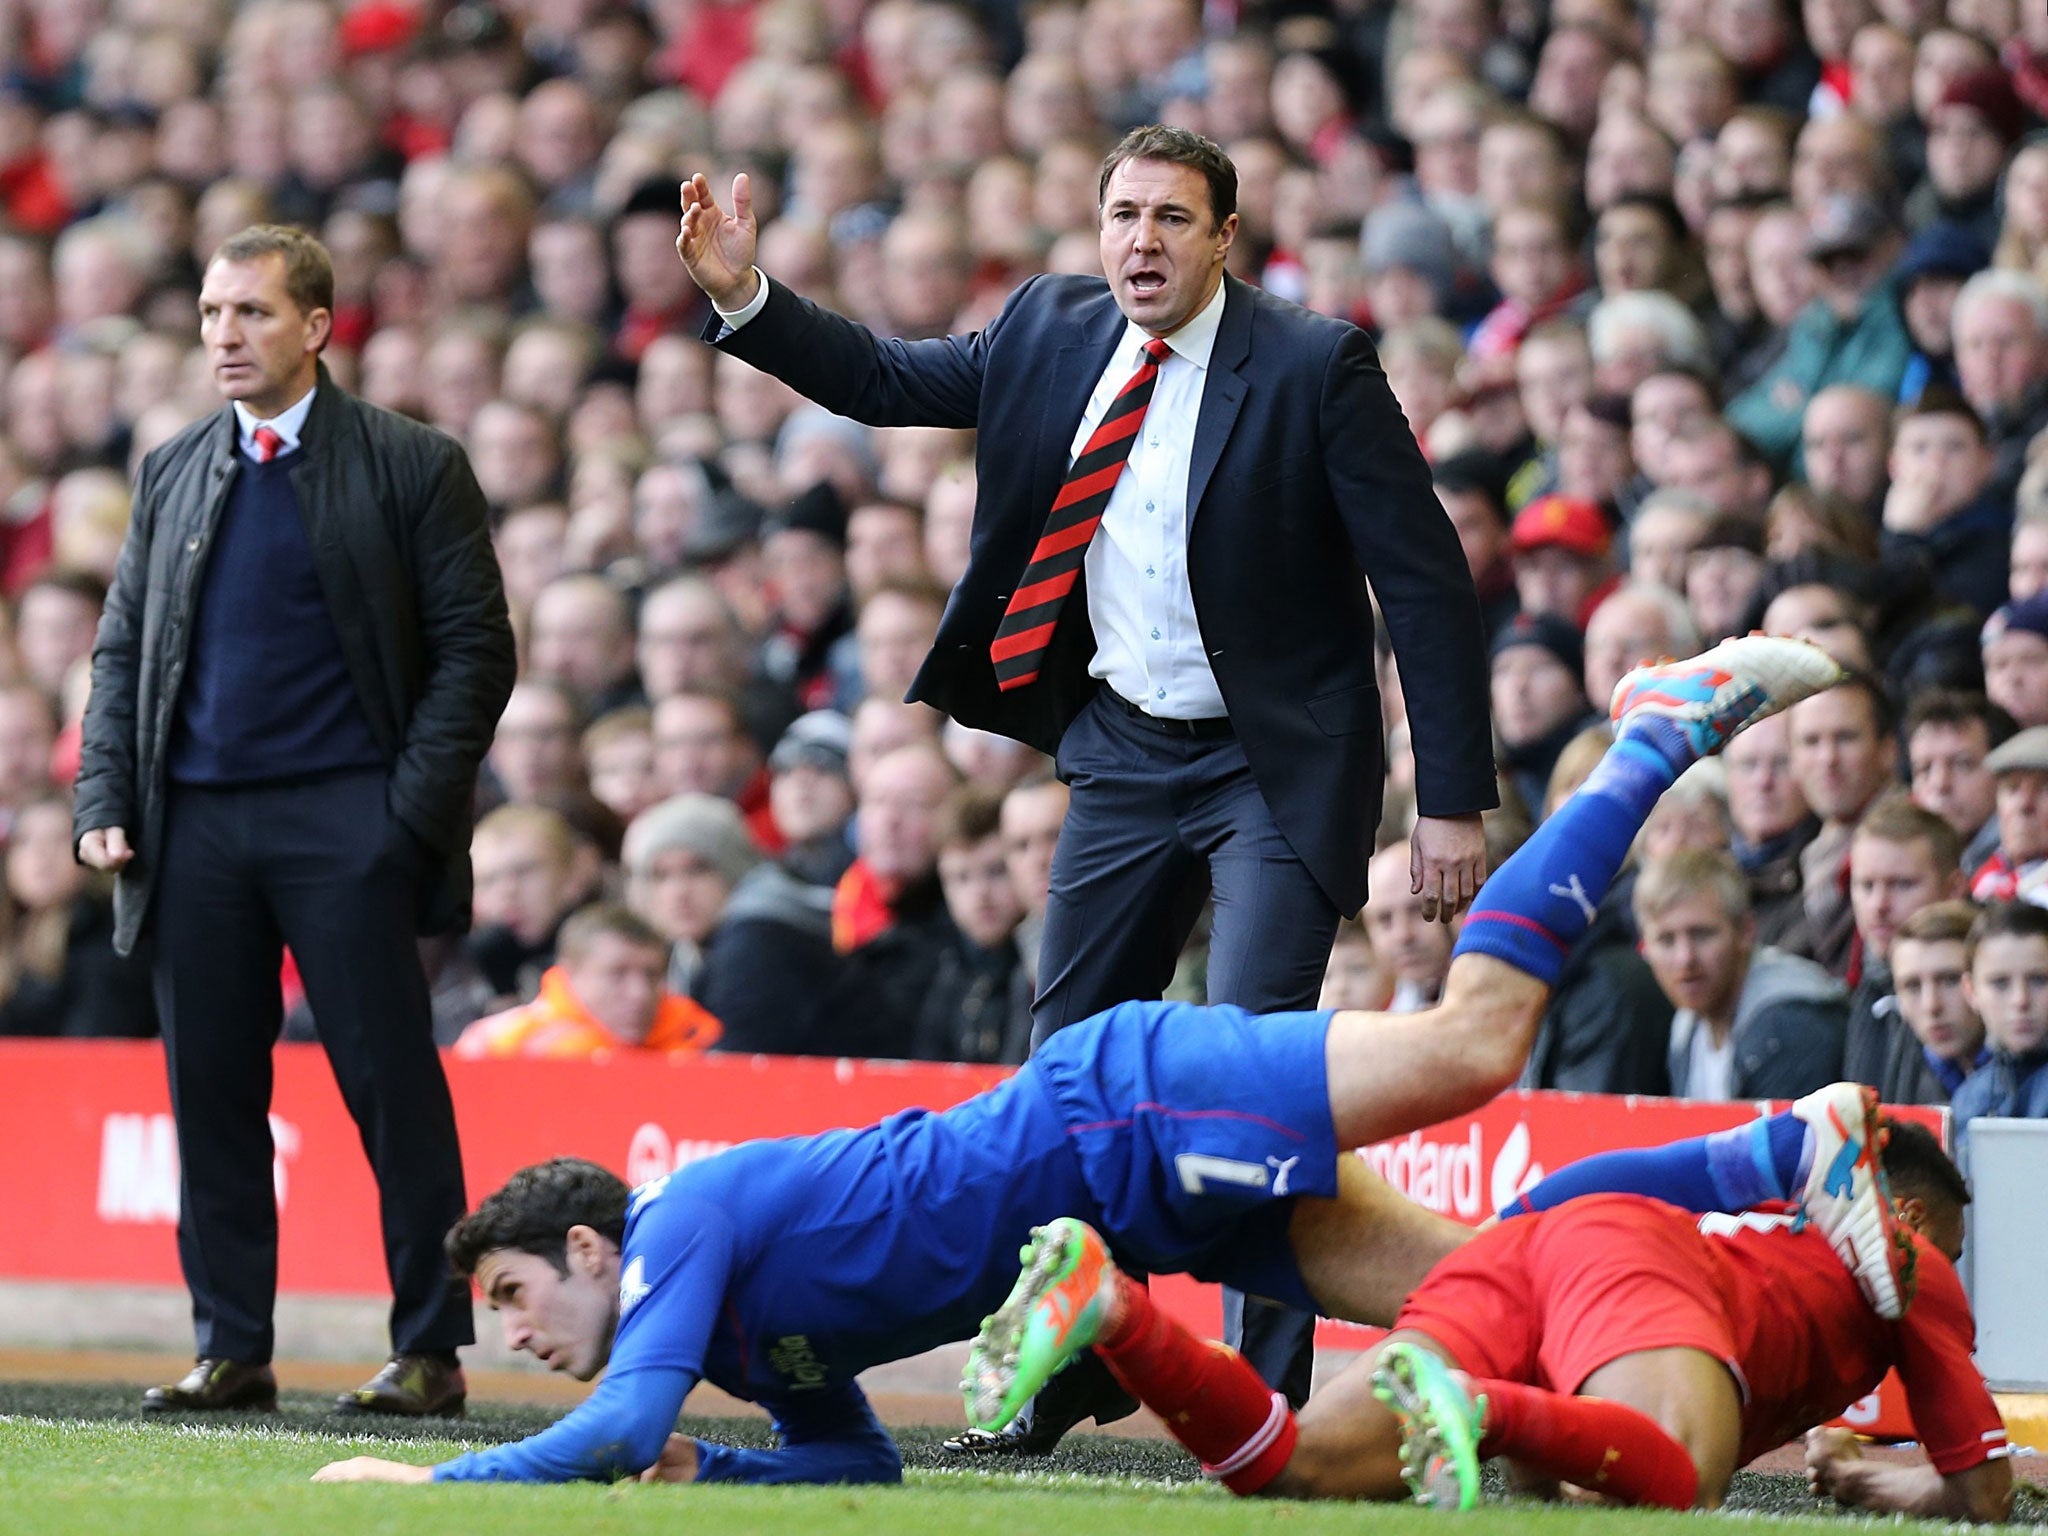 Malky Mackay, centre, who remains the Cardiff City manager, focused on his side's game at Anfield on Saturday, a 3-1 defeat, despite all the off-field distractions provided in the previous 48 hours by his club's billionaire owner, Vincent Tan